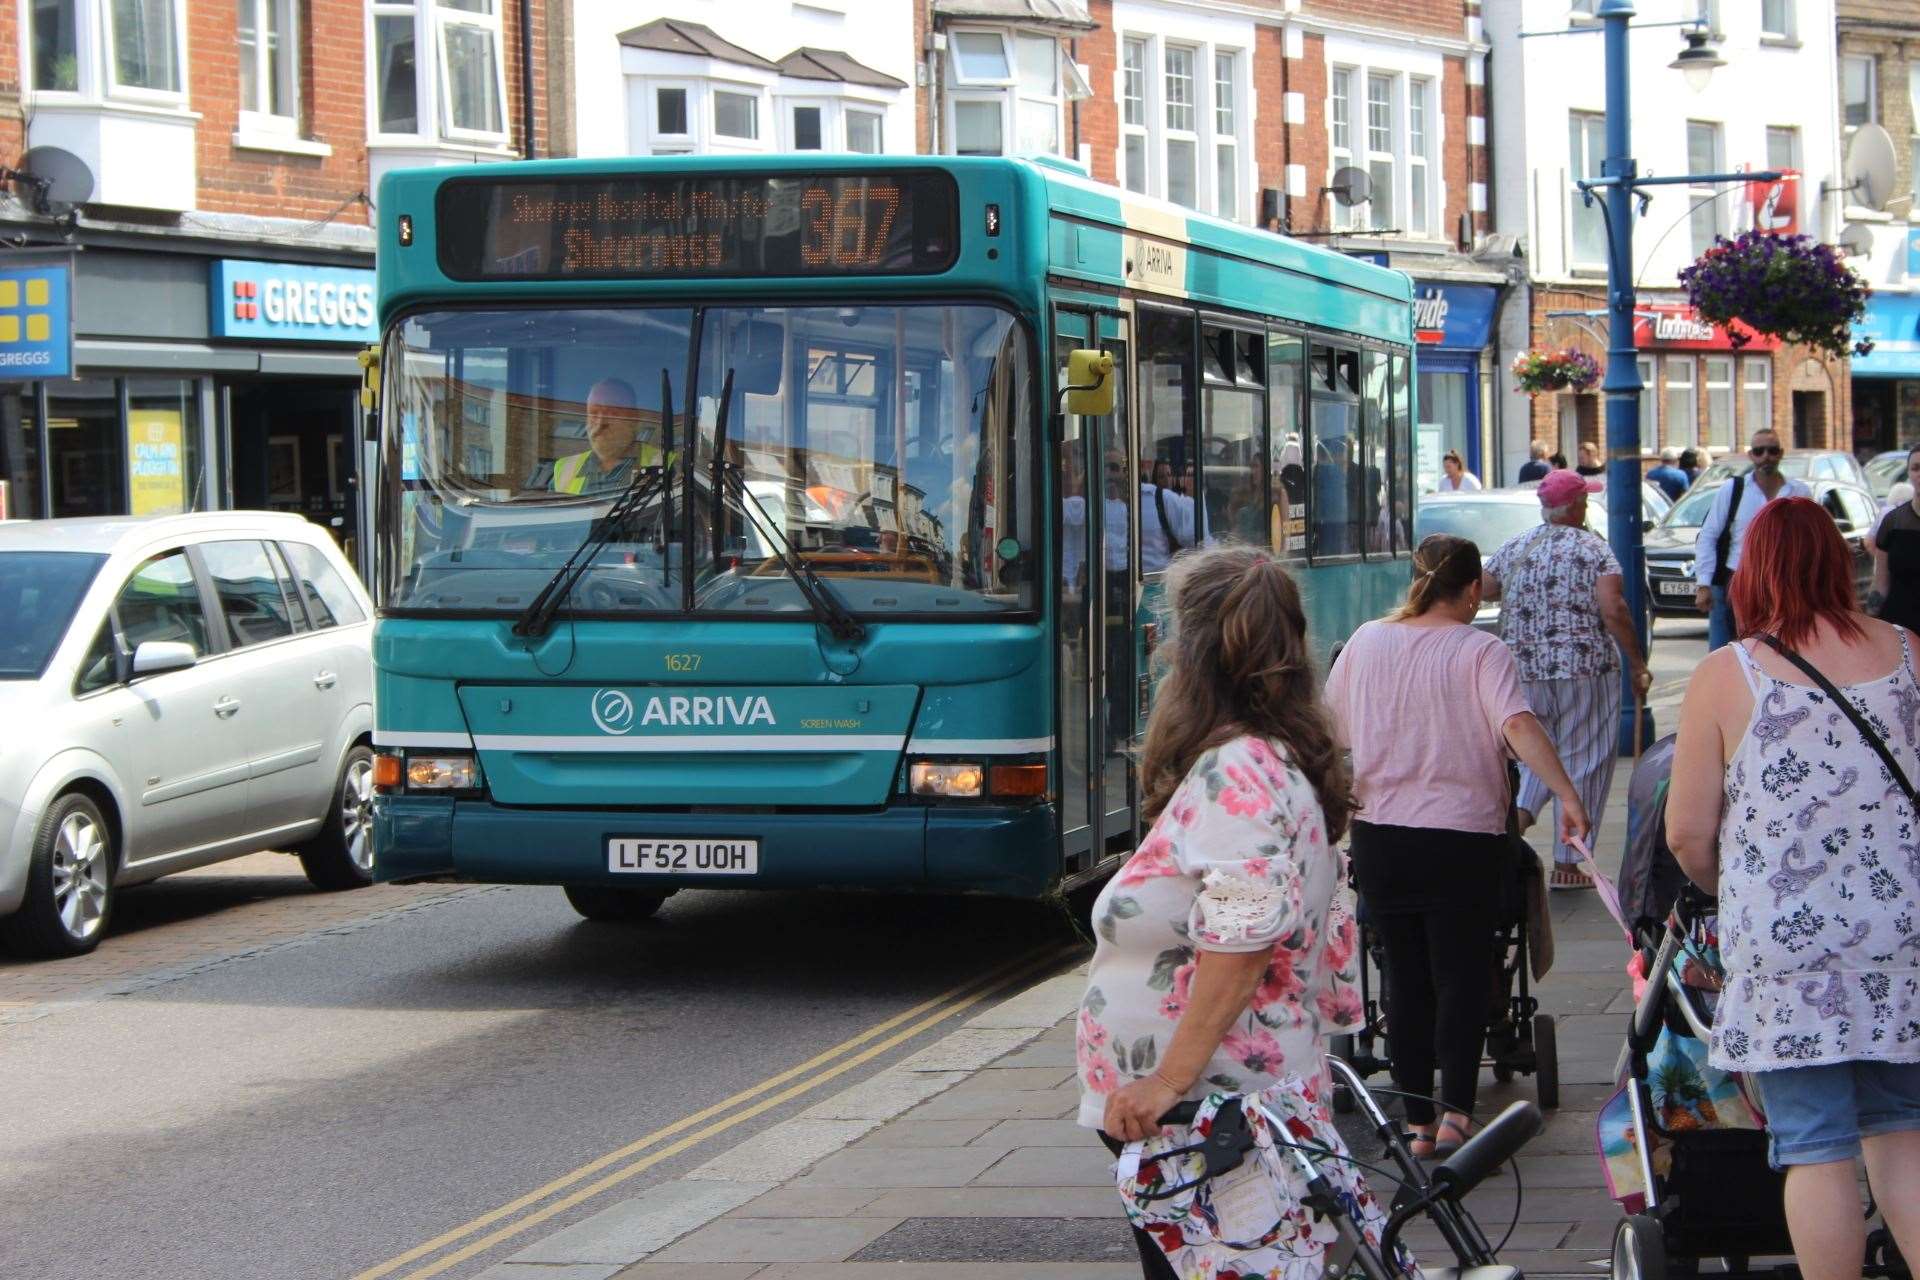 Arriva bus in Sheerness High Street